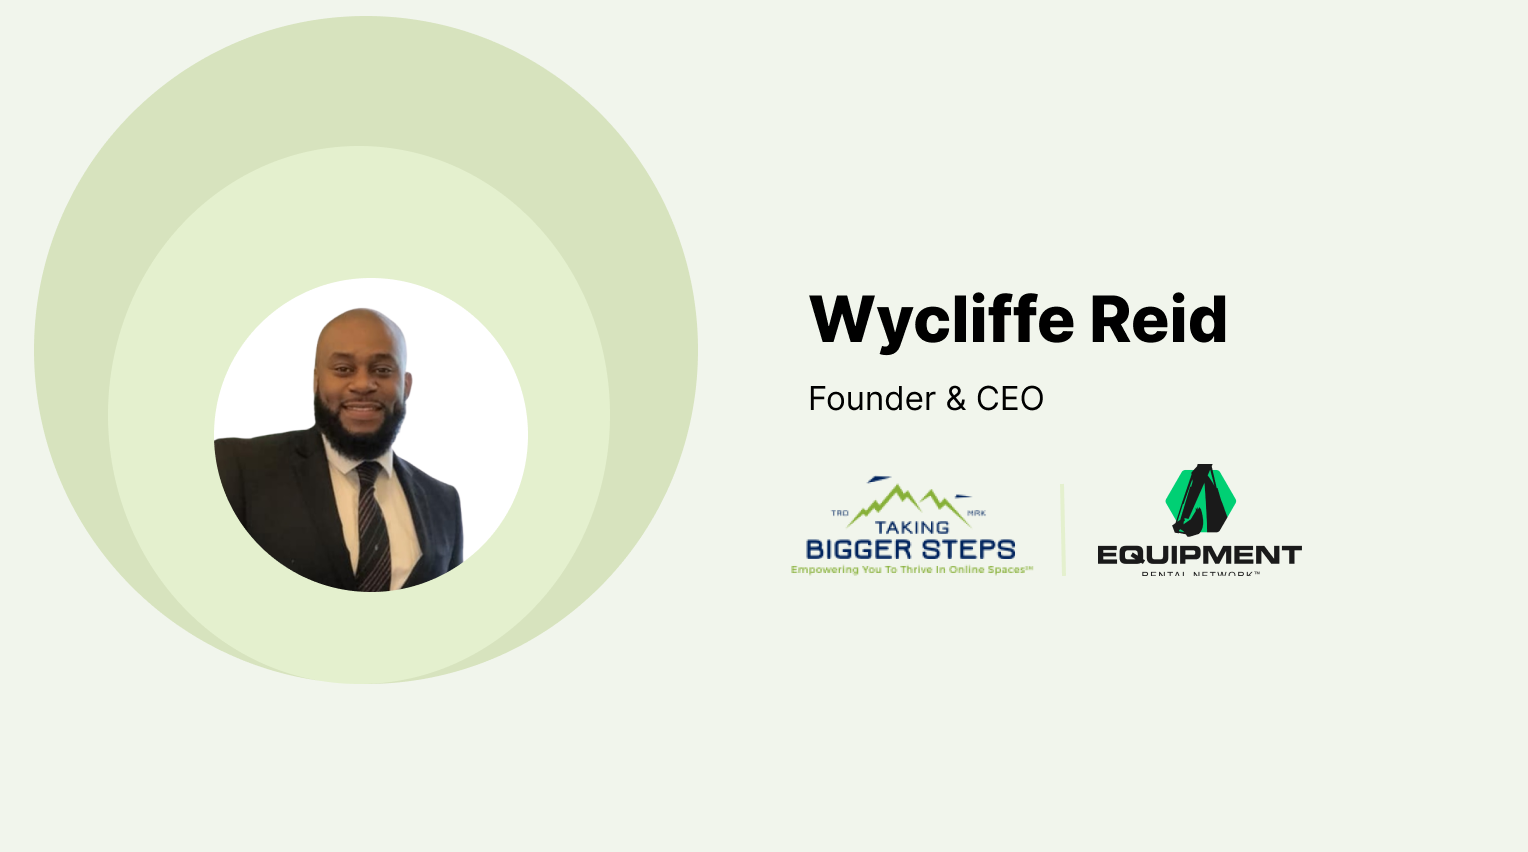 Wycliffe Reid, founder and CEO of Taking Bigger Steps